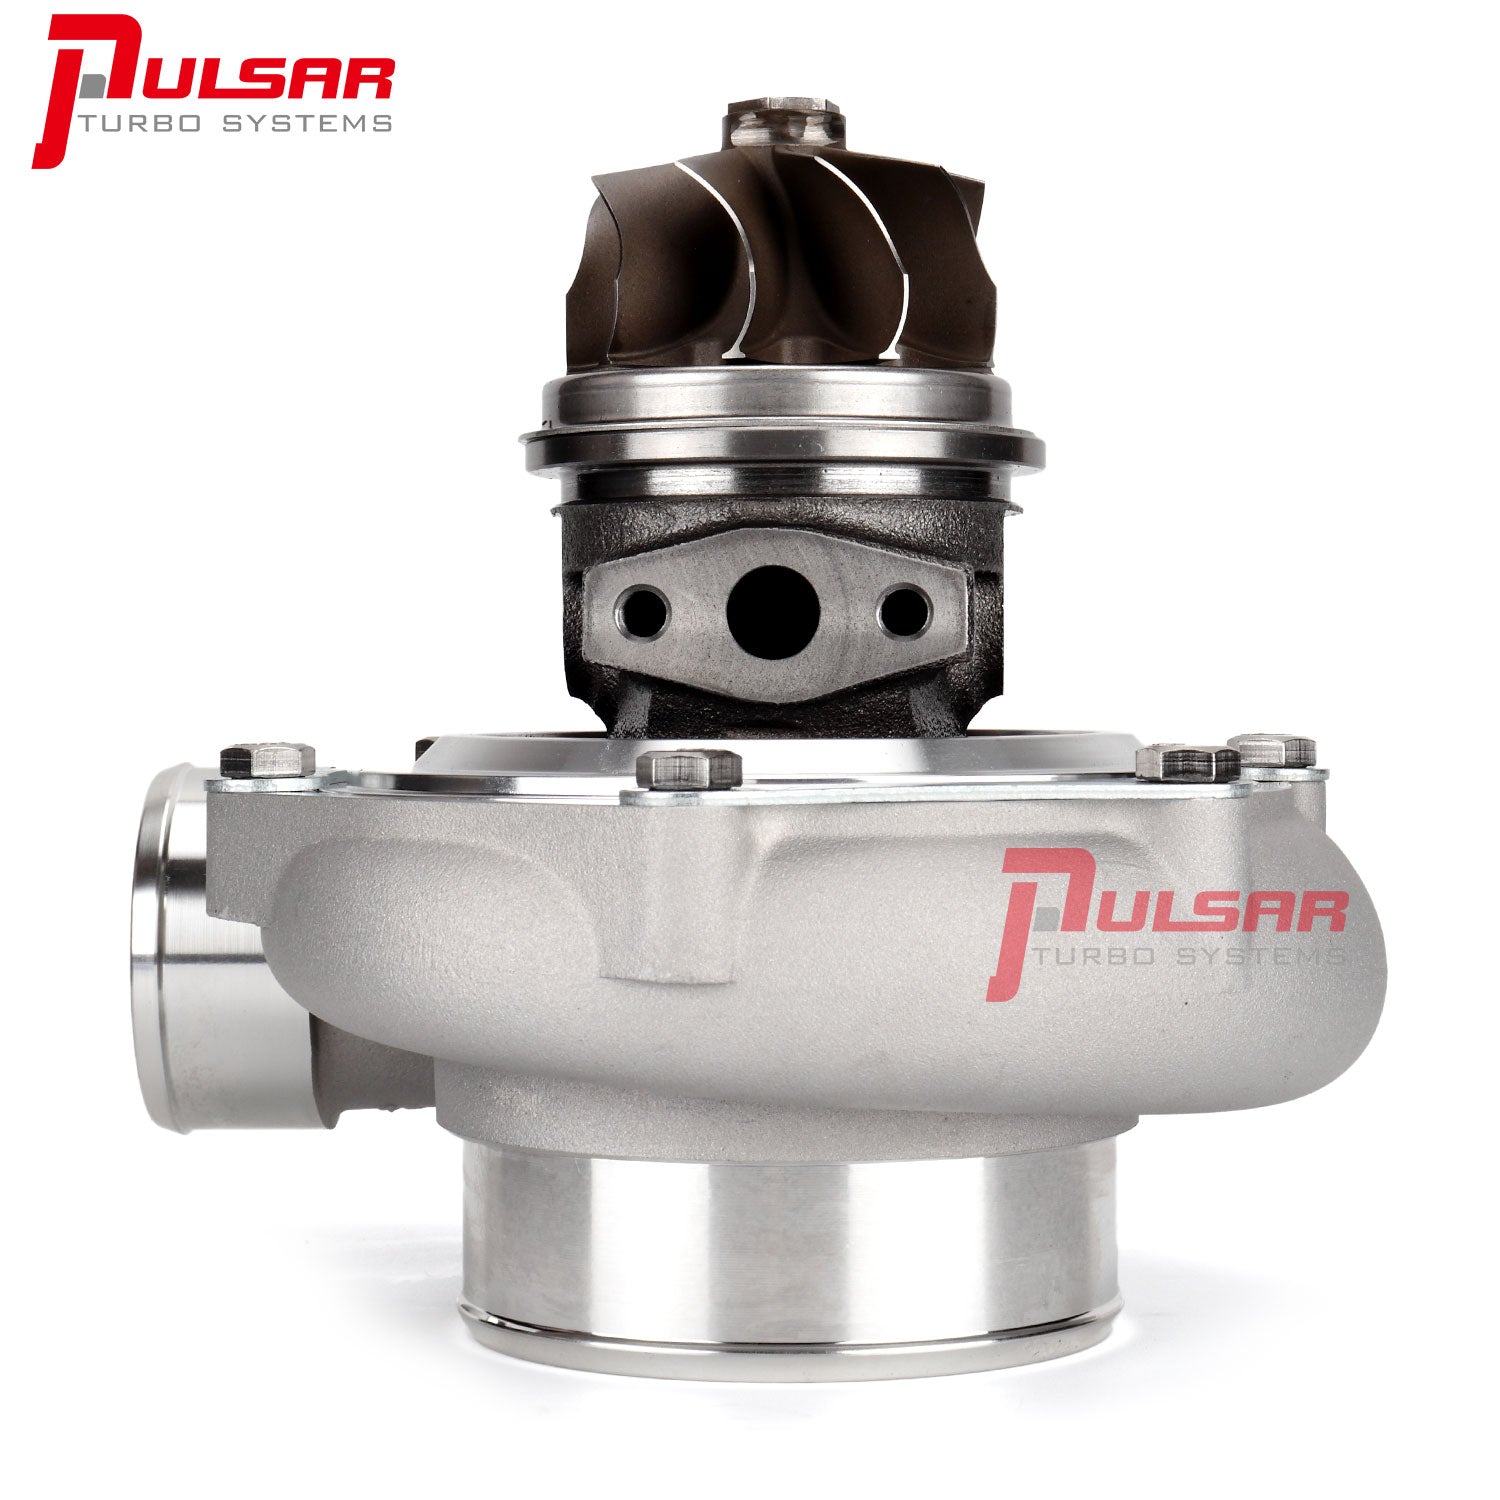 PULSAR Next GEN 6682 Supercore for Ford Falcon to replace the factory GT3582R